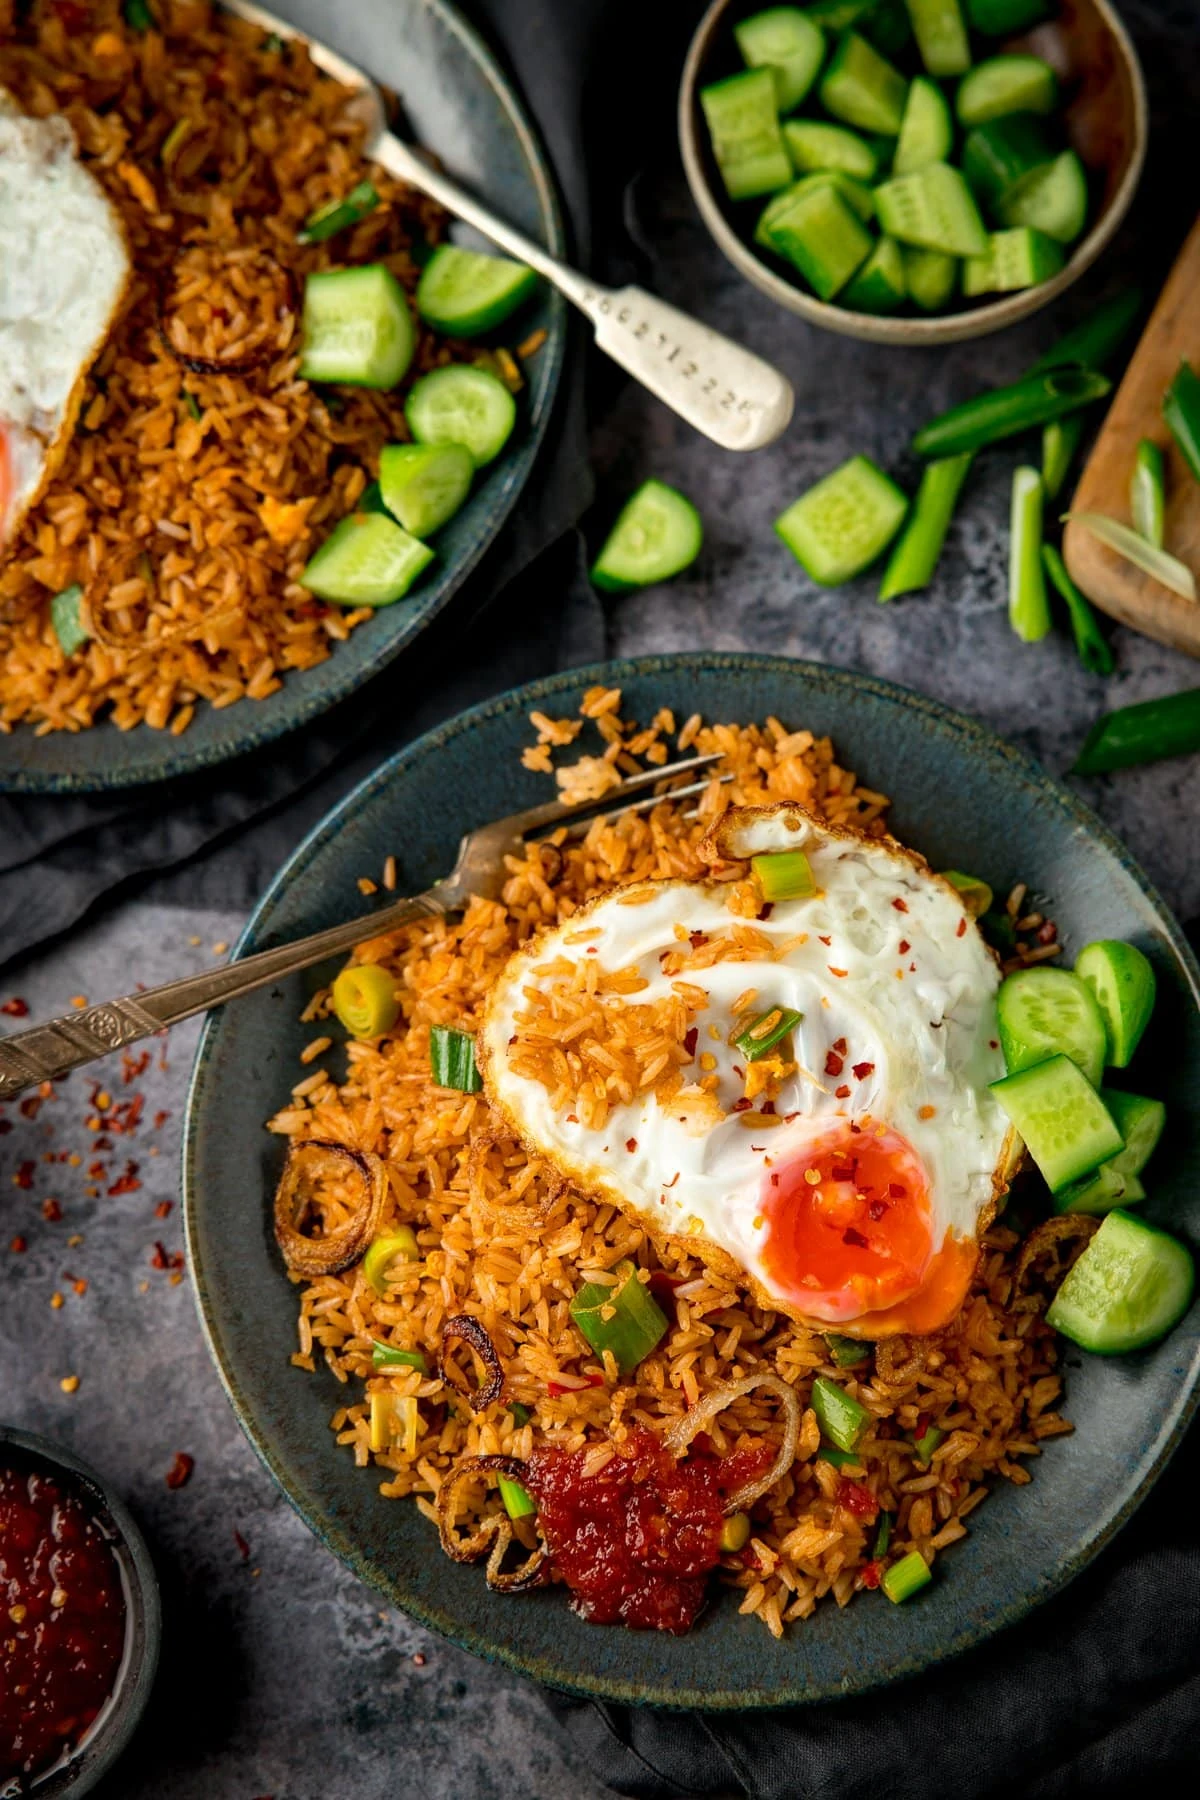 Overhead image of nasi goreng rice on a plate, topped with a fried egg